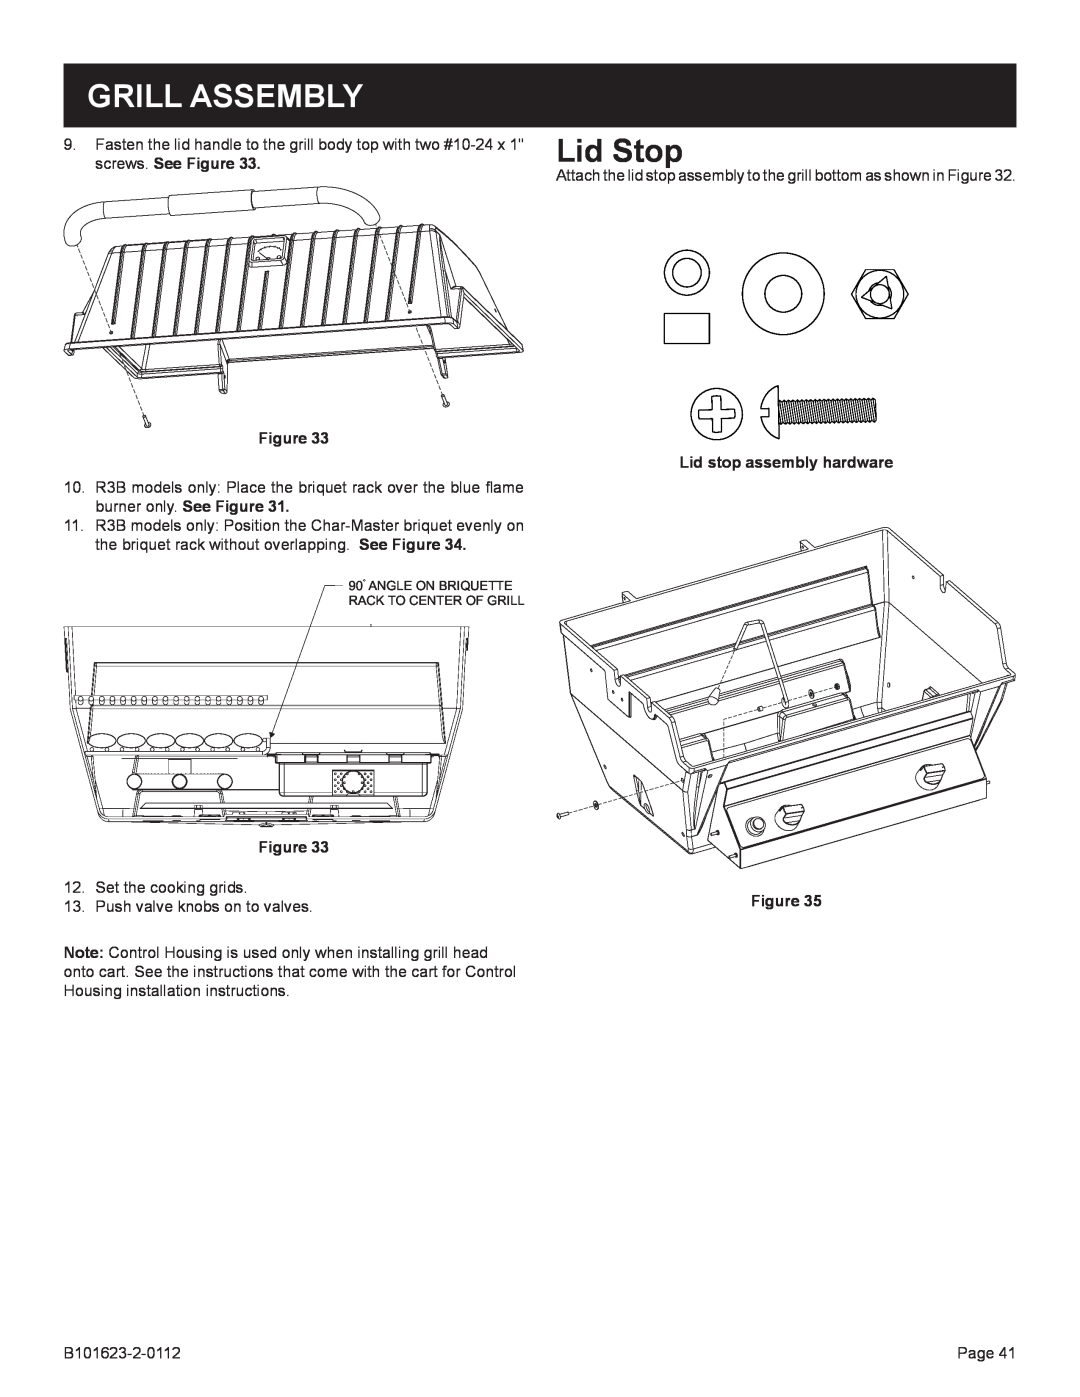 Broilmaster P3SX-1, H3X-1 Grill Assembly, Lid Stop, Lid stop assembly hardware, Angle On Briquette Rack To Center Of Grill 